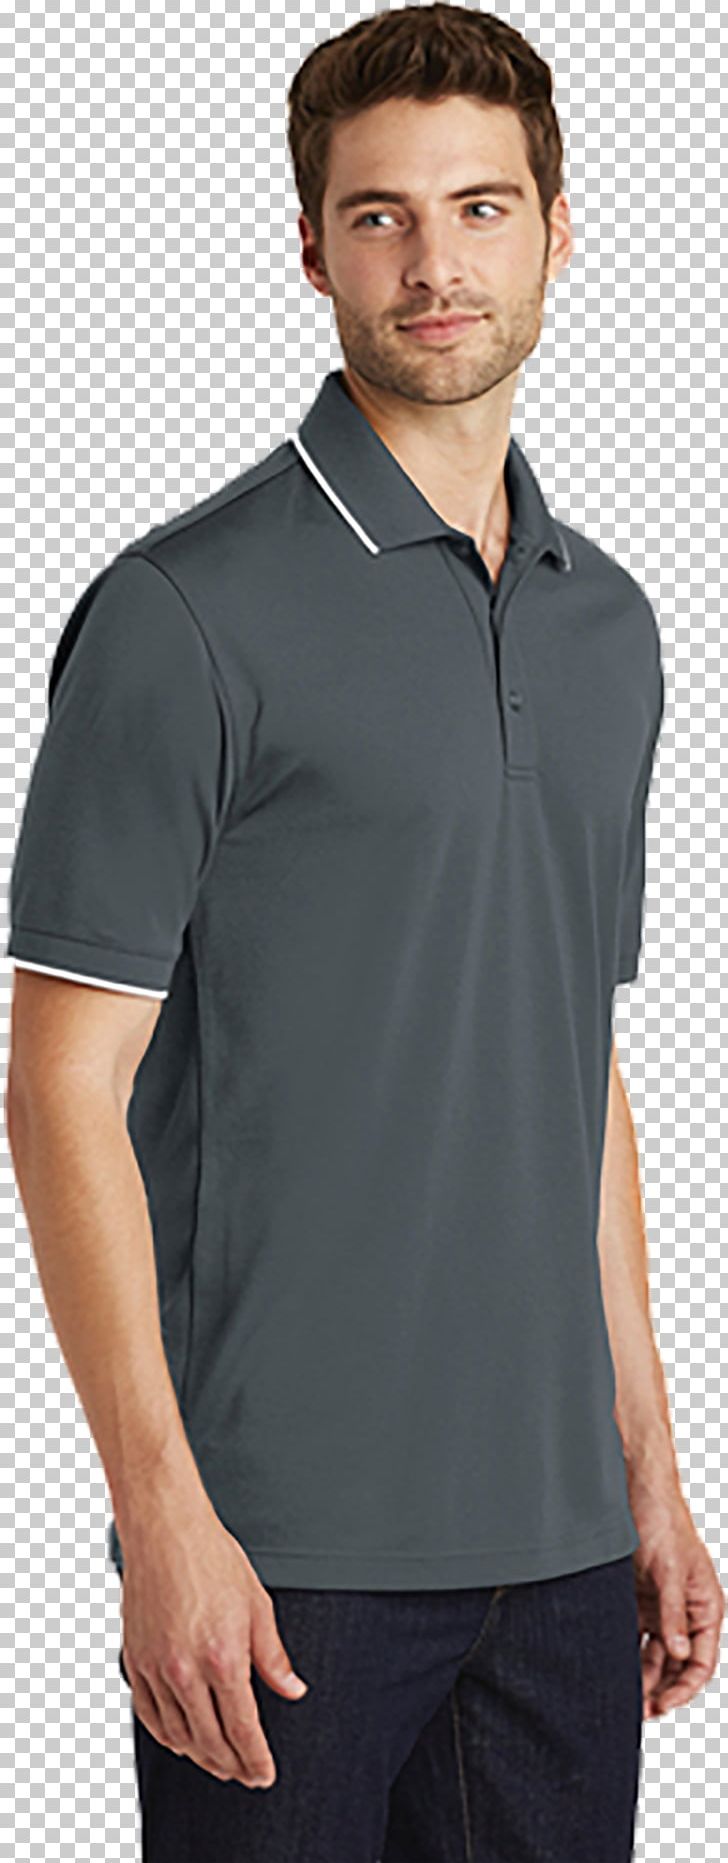 Polo Shirt T-shirt Piqué Sleeve PNG, Clipart, Cap, Clothing, Collar, Embroidery, Longsleeved Tshirt Free PNG Download